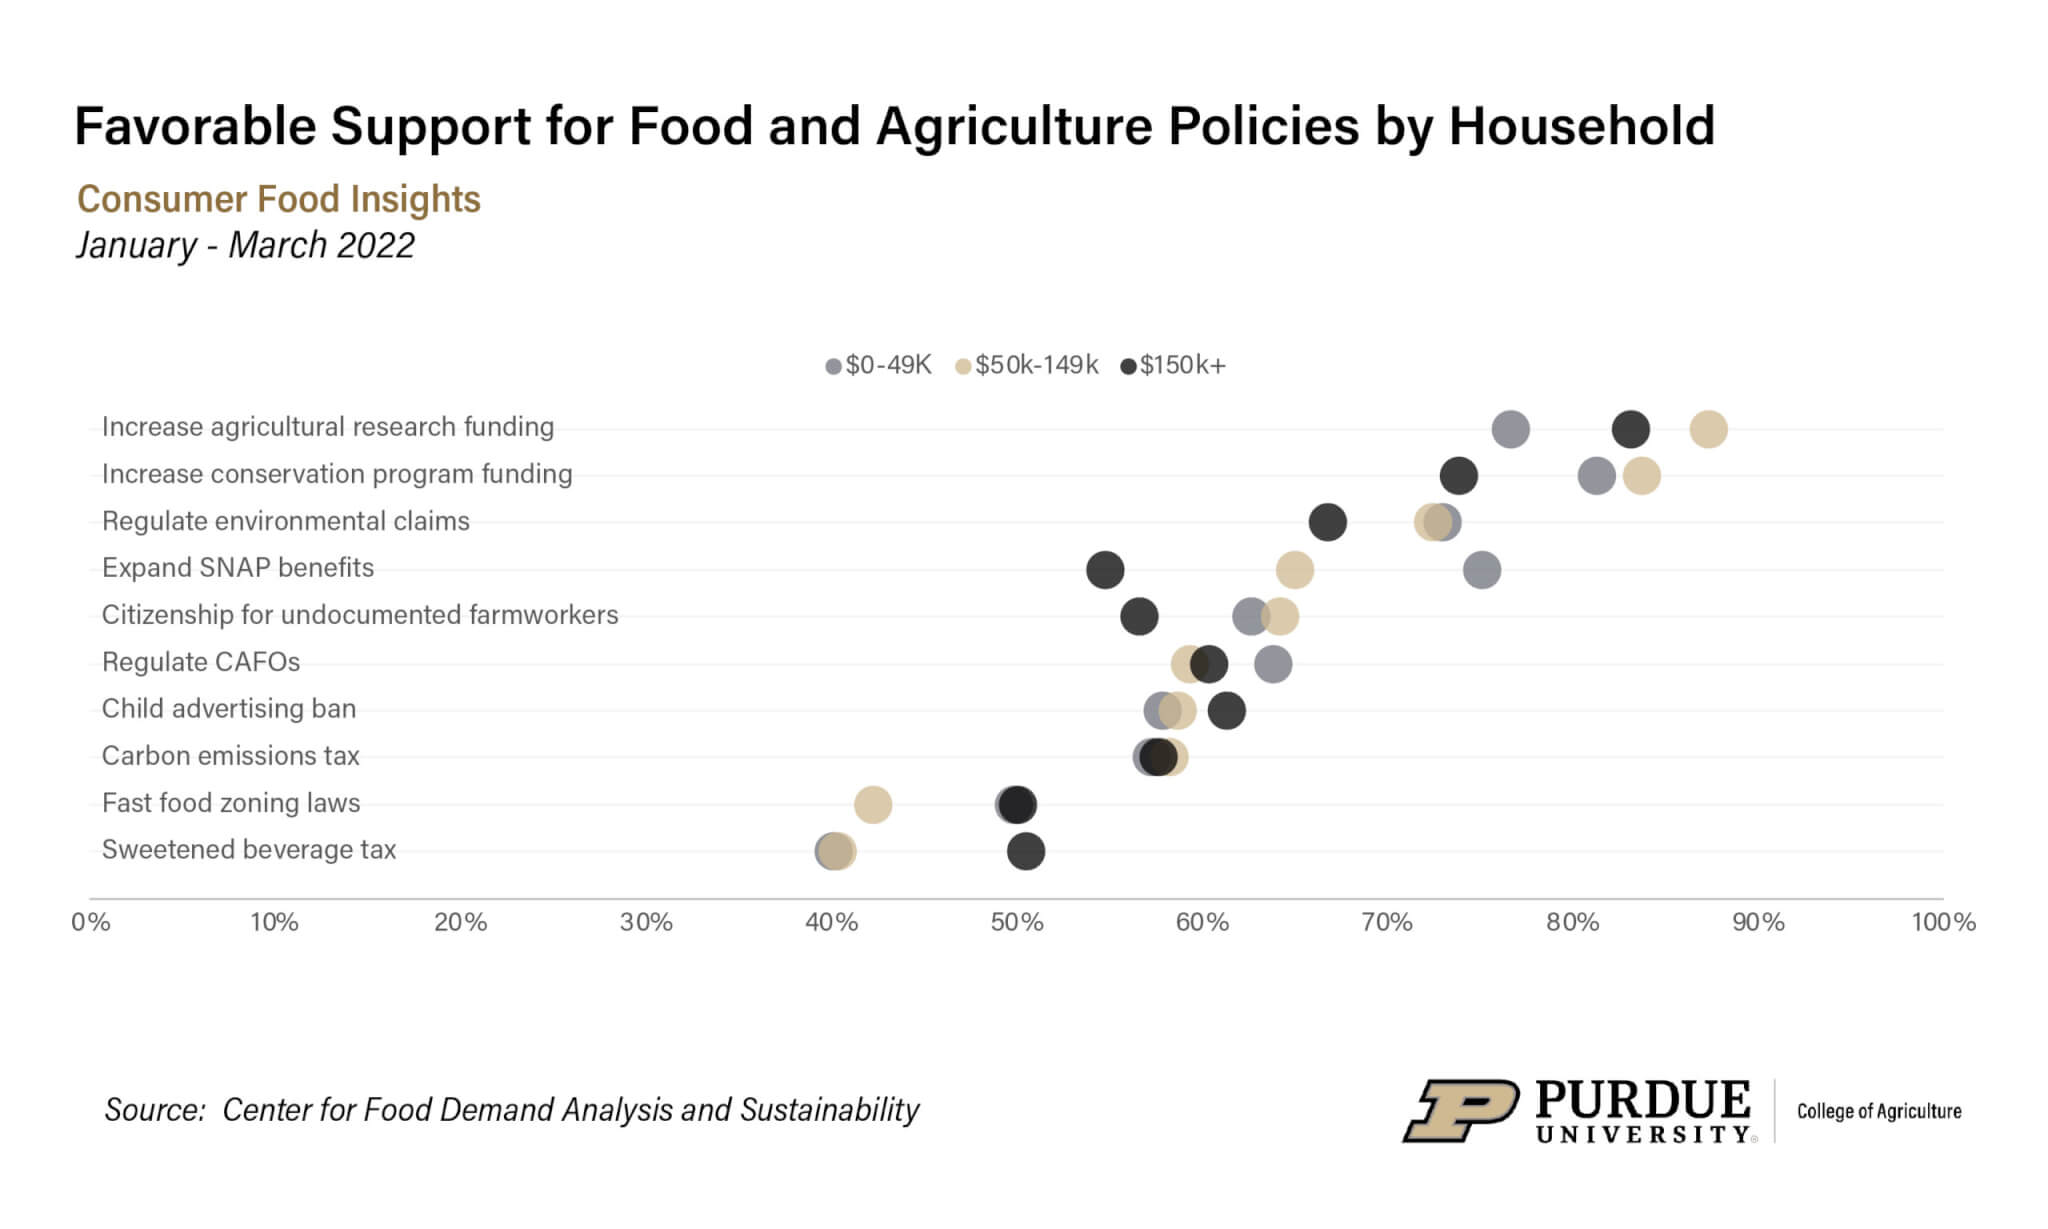 a new survey by Purdue’s Center for Food Demand Analysis and Sustainability